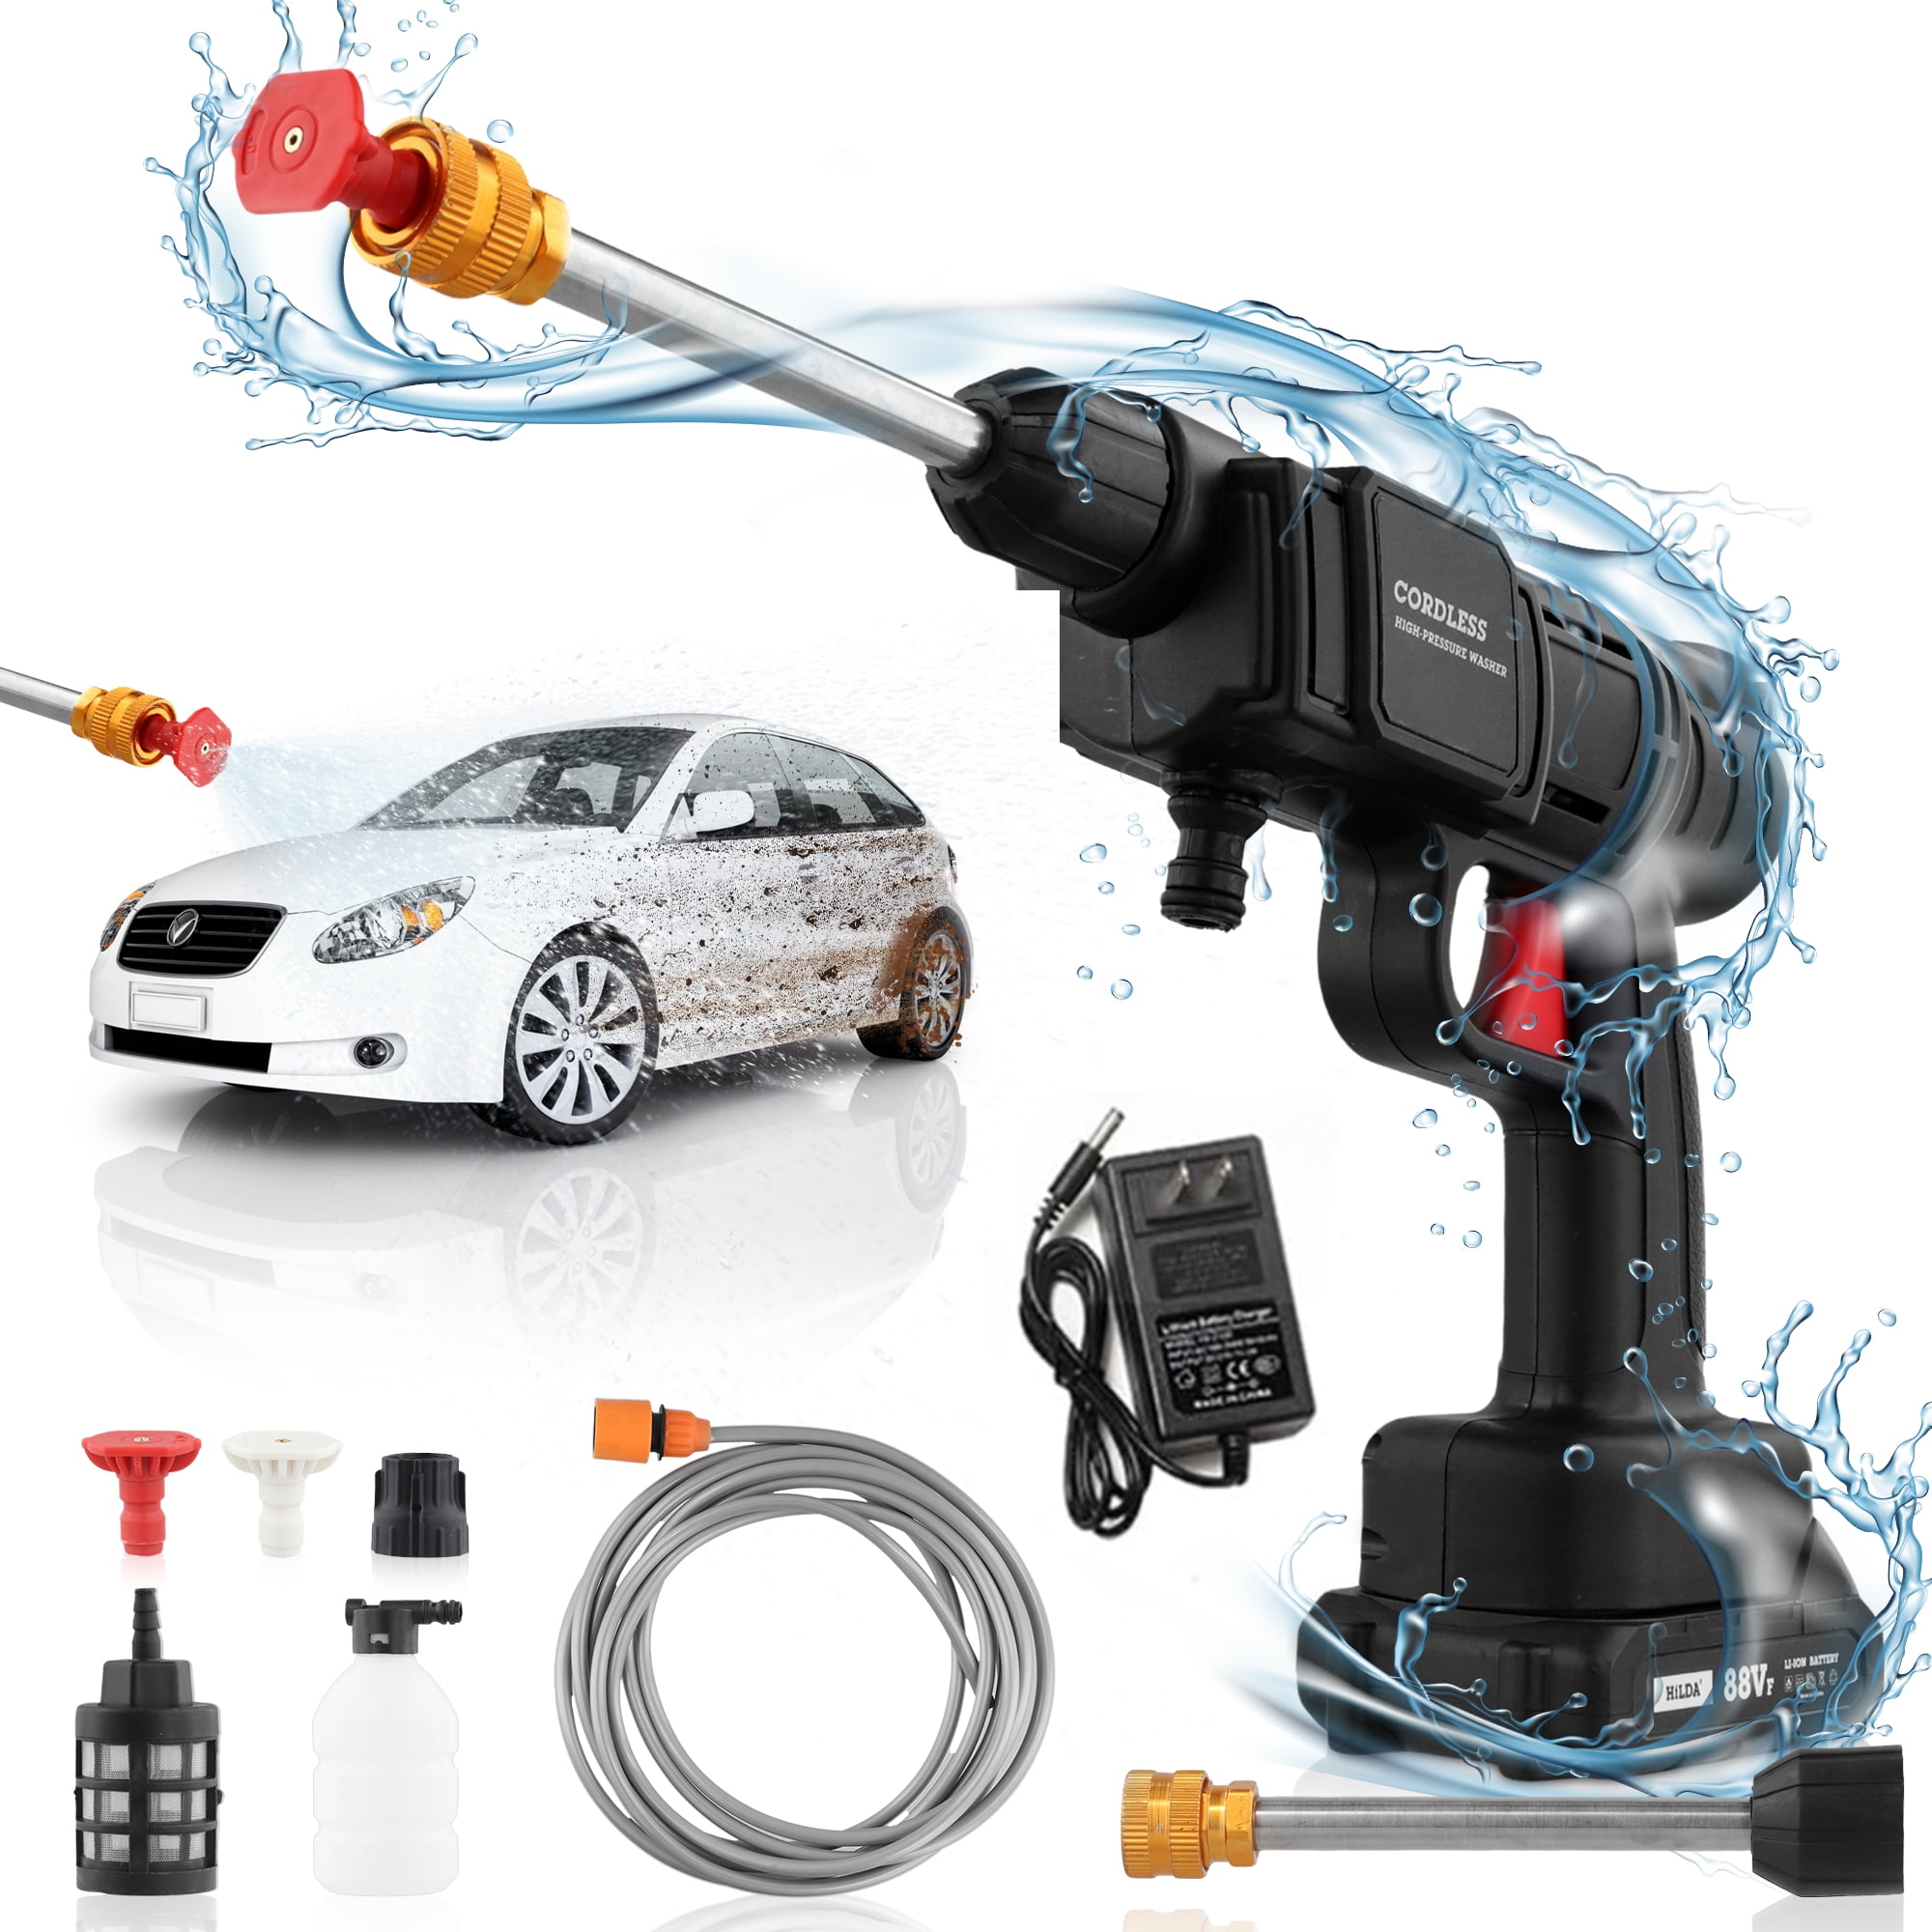 Cordless Pressure Washer 21V 22bar Portable Power Washer Cleaner Battery  Powered High Pressure Car Washer Cleaner for Washing Cars Cleaning Floors  Watering Flowers 